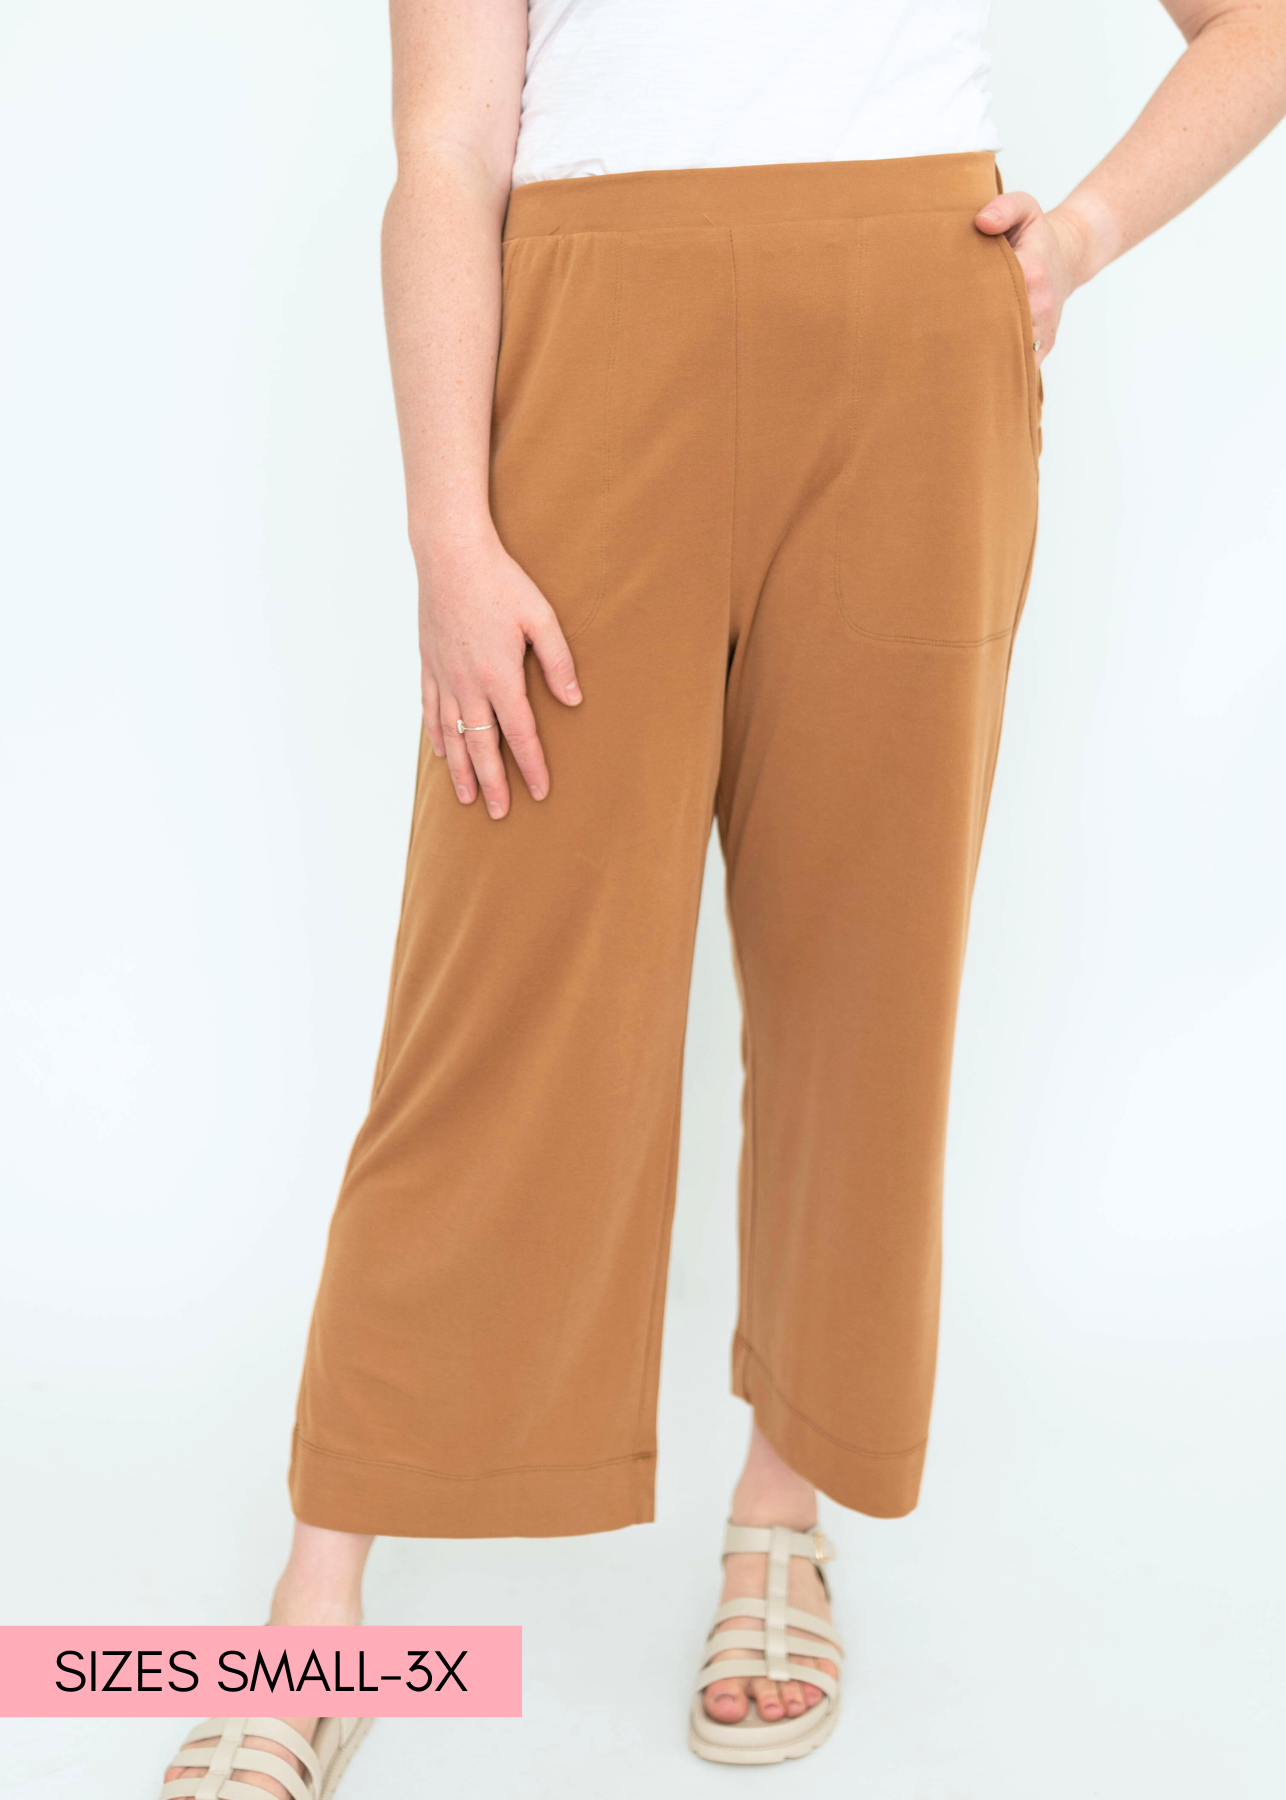  Front view of a mocha colored wide leg knit pants.